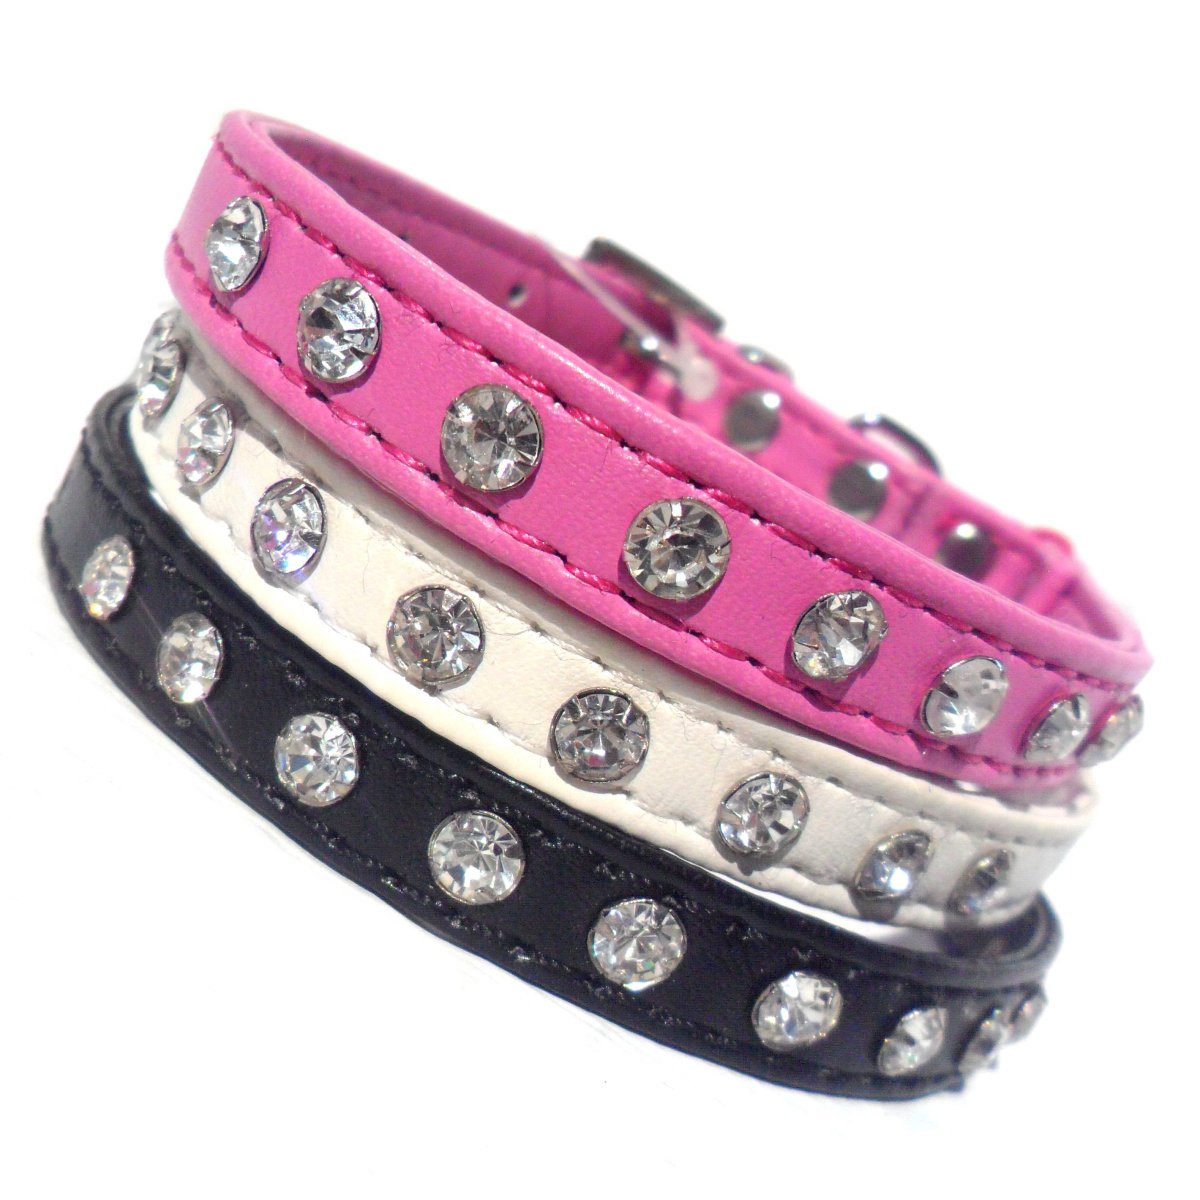 Glamour Puss Cat Collar Cat Collars | Clothes for Cats